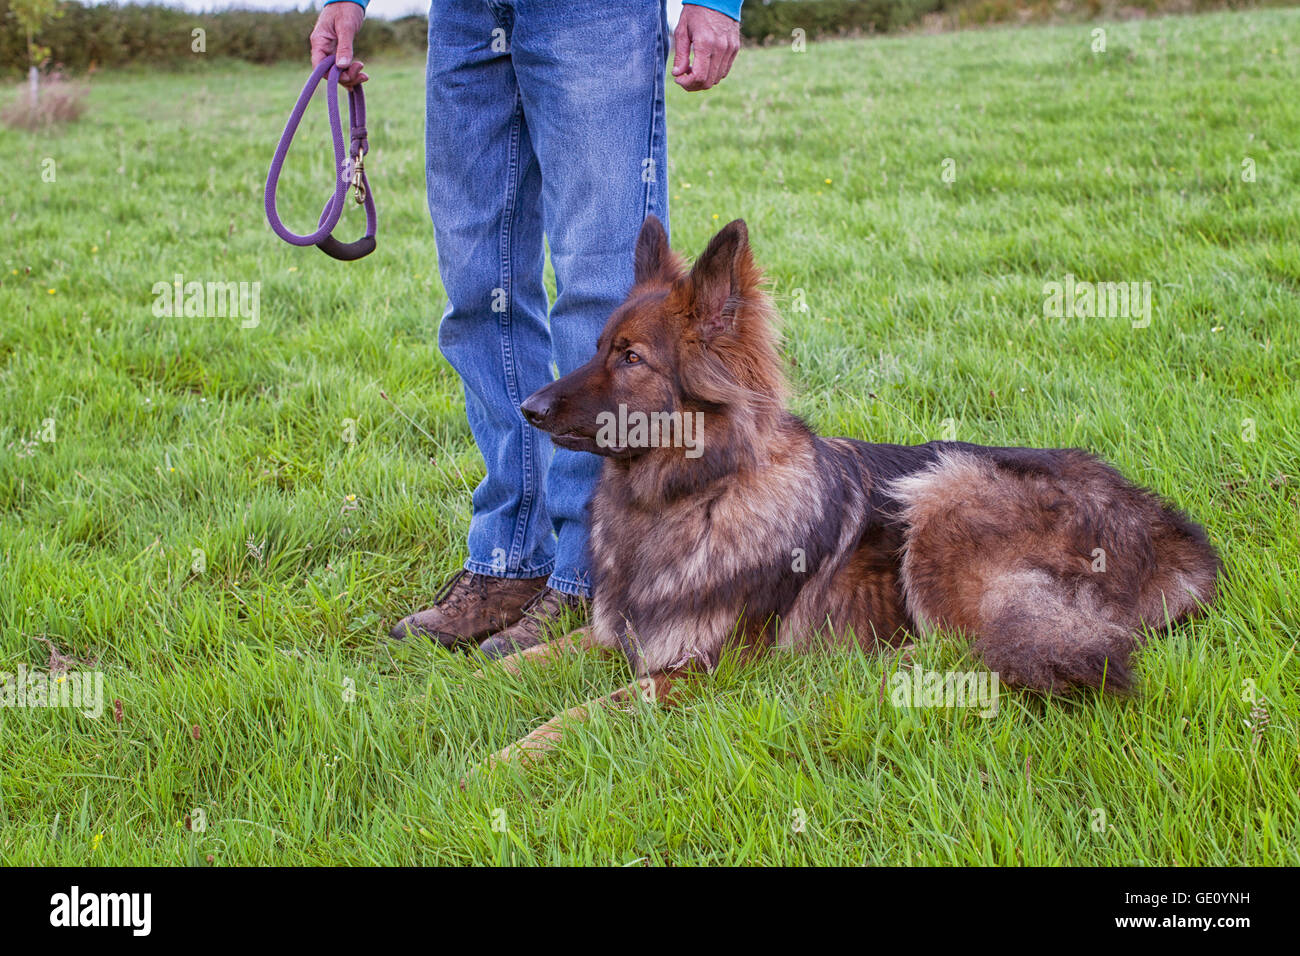 German shepherd Dog laid on grass next to his handler who is holding a lead Stock Photo